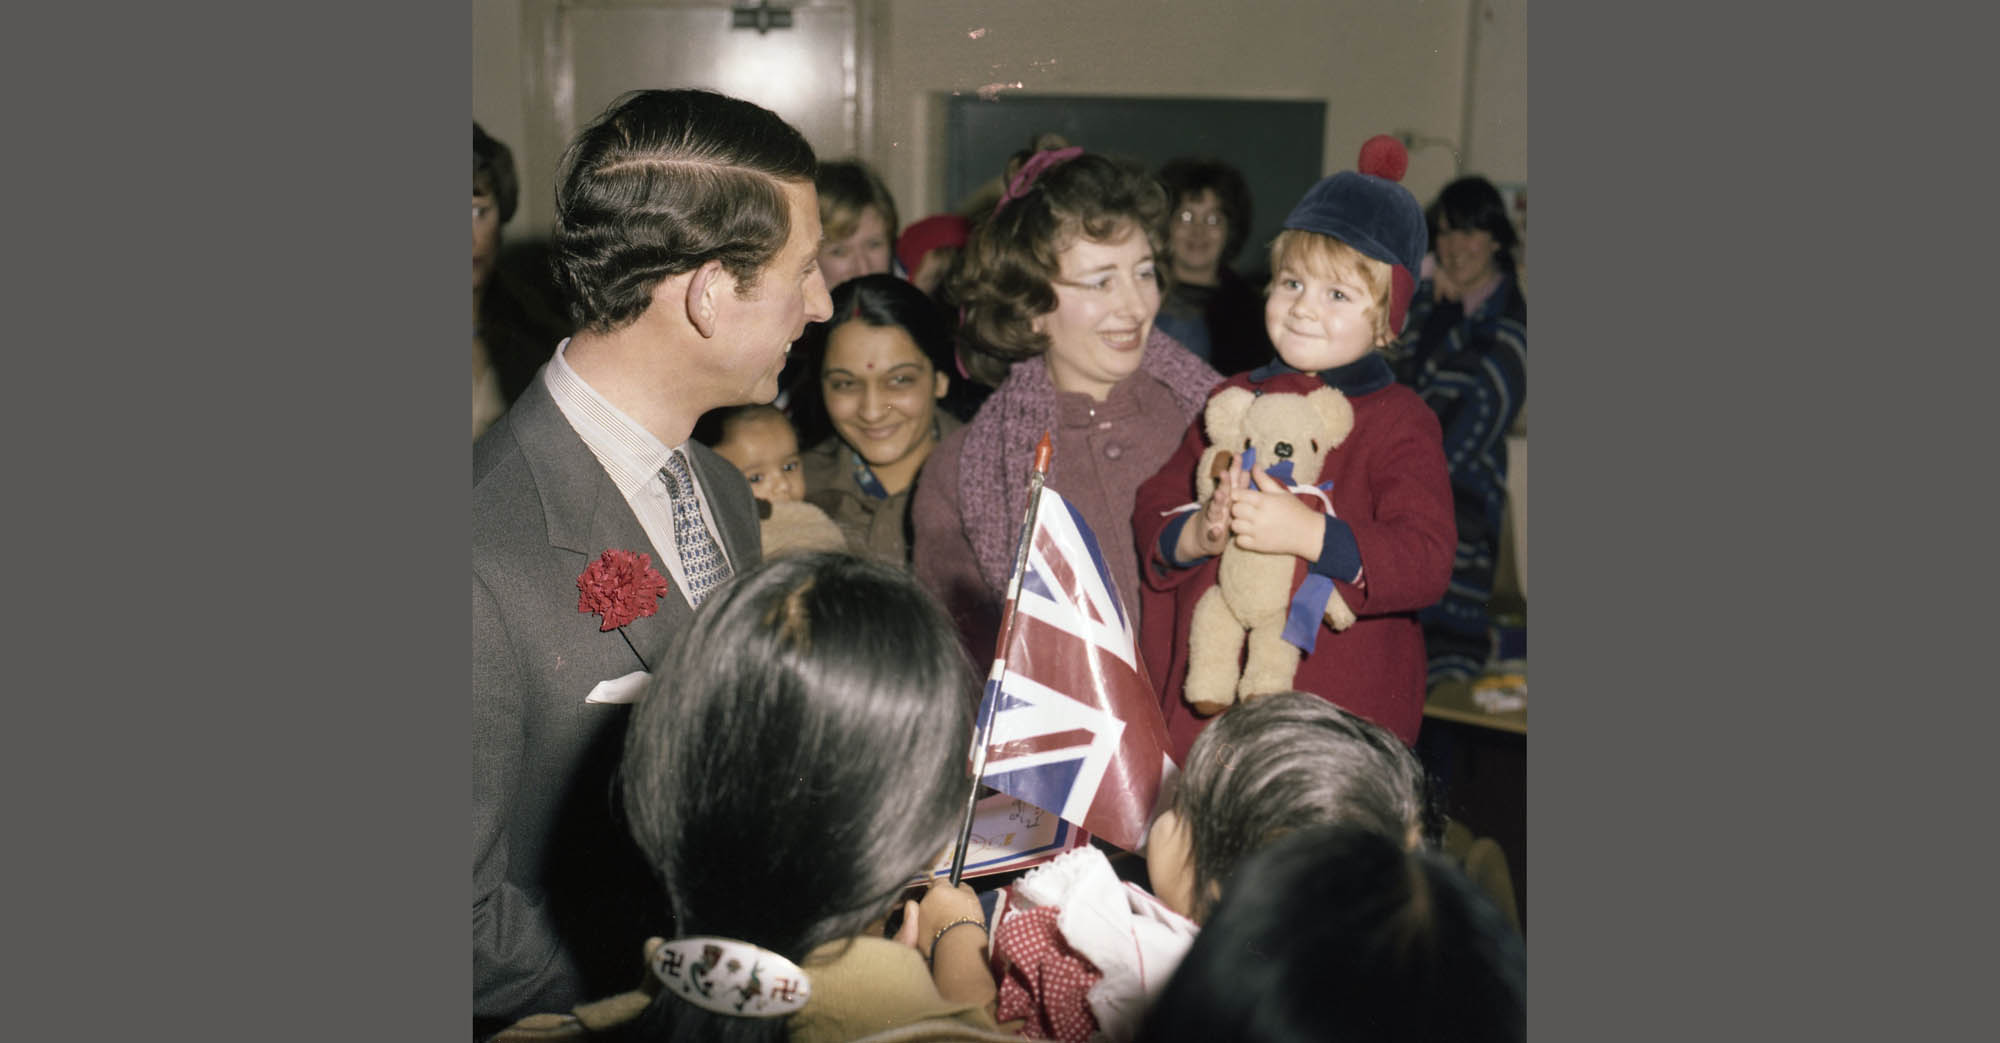 Prince Charles greets families at the Belgrave Neighbourhood Centre, 1981 - 